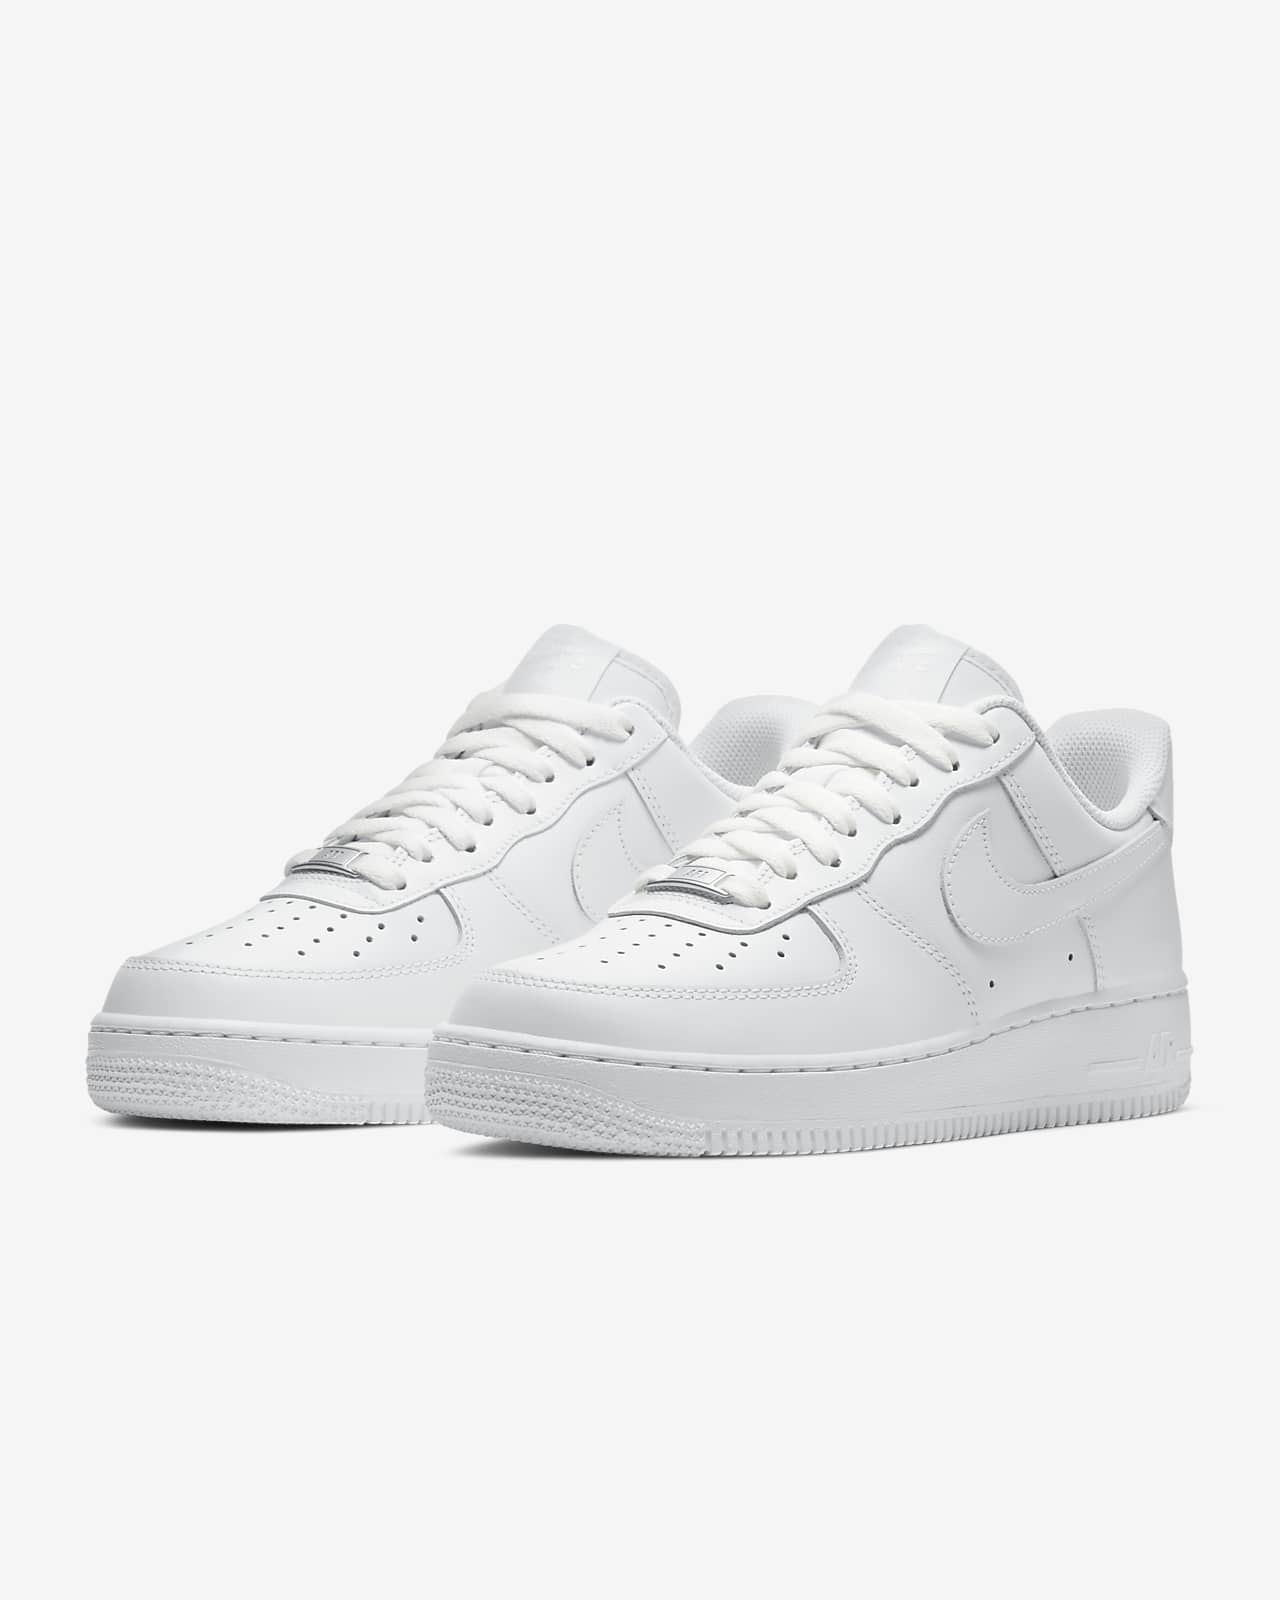 nike air force ones womens 7.5